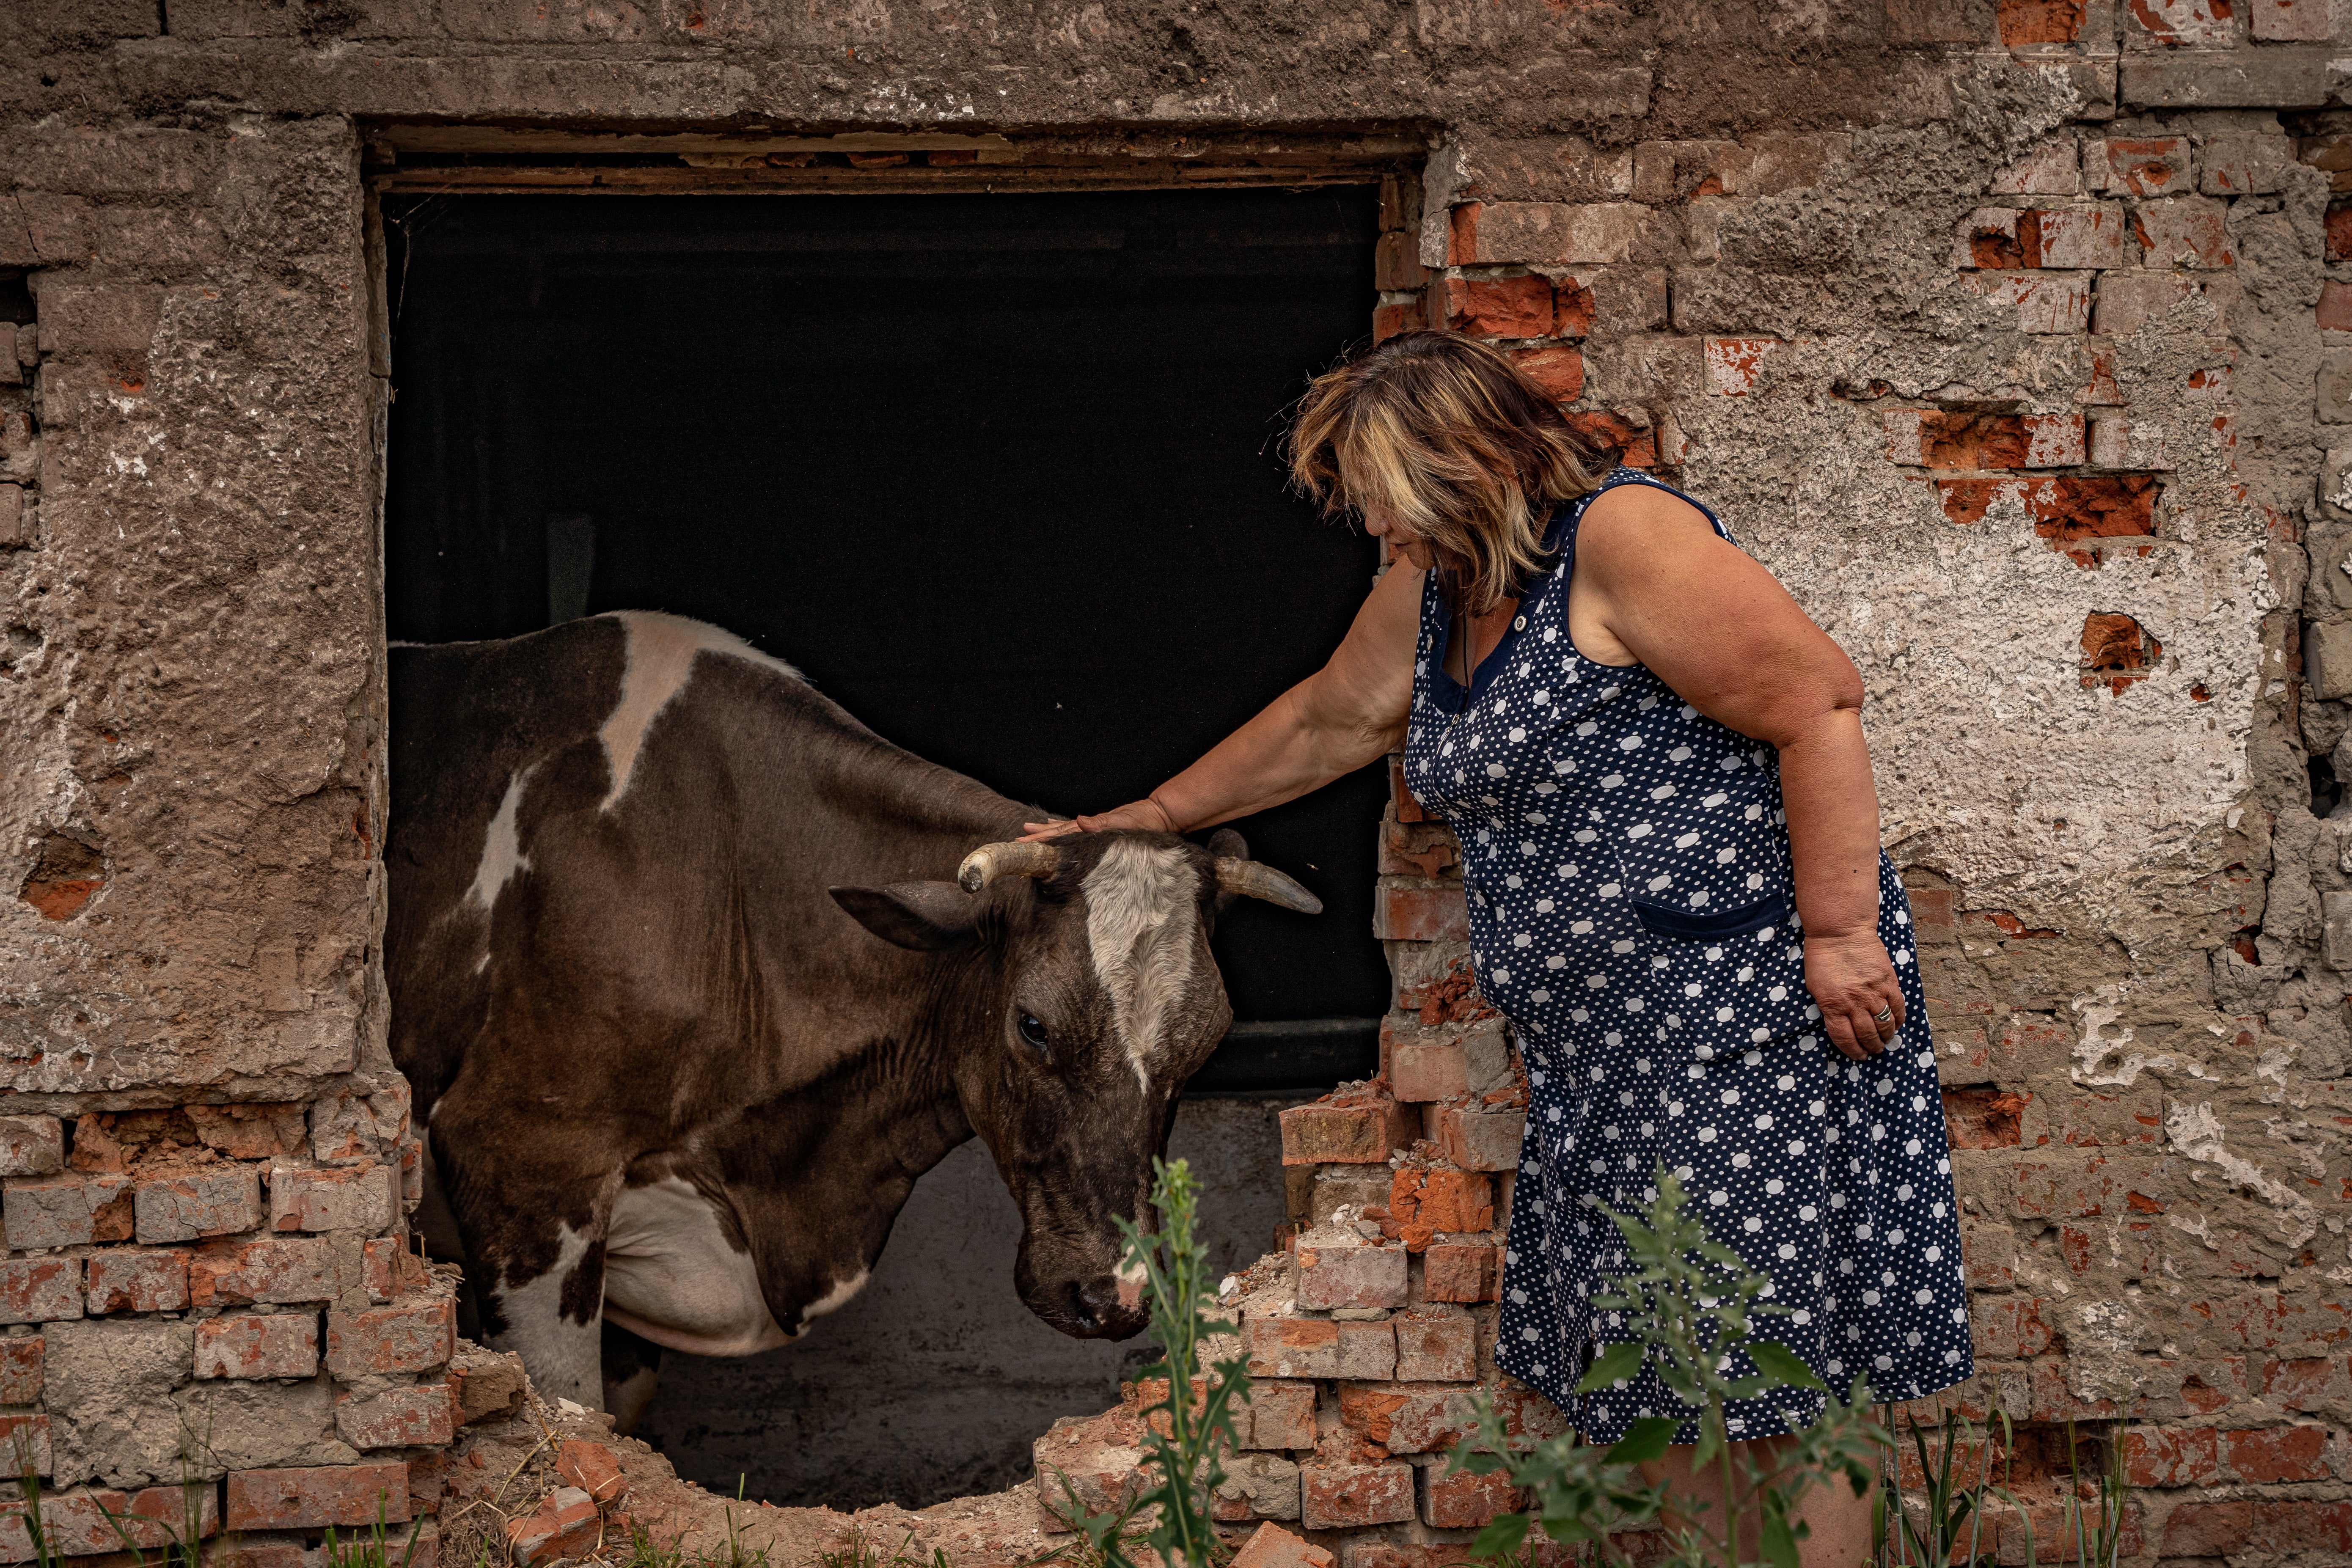 Lubov Zlobina, a farmer in Kharkiv, comforts one of her cows wounded by gunfire and shelling